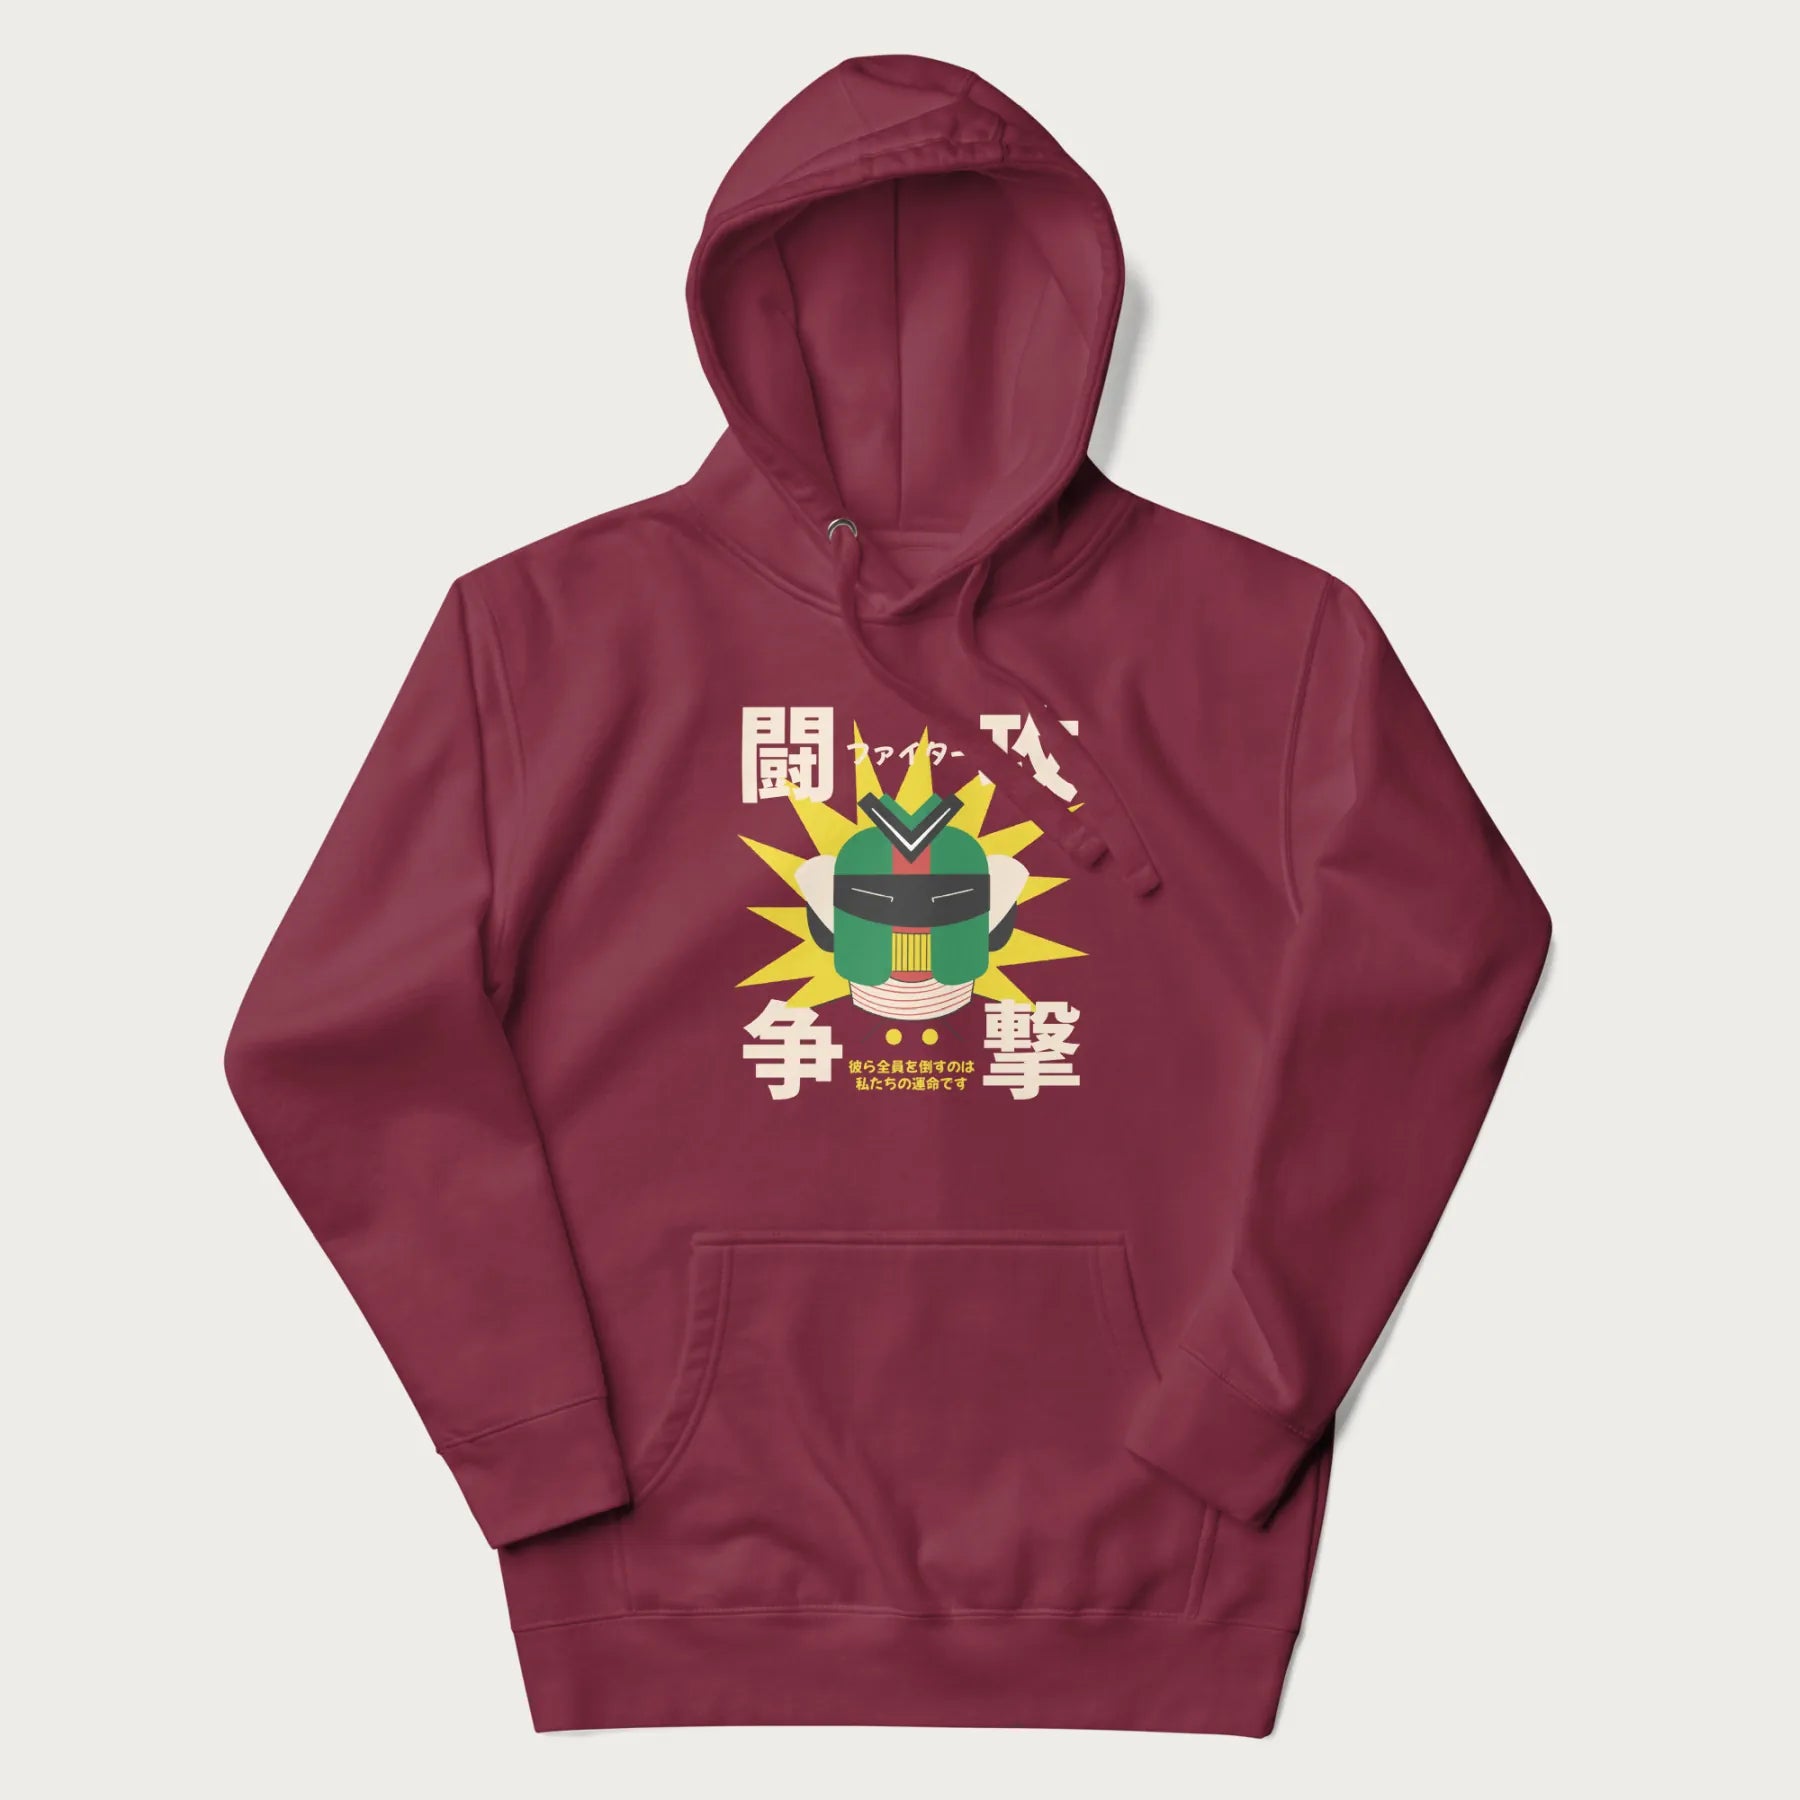 Maroon hoodie with retro graphic of a mecha warrior and Japanese text for "Fight," "Attack," "Conflict," and "Destiny to defeat them all".